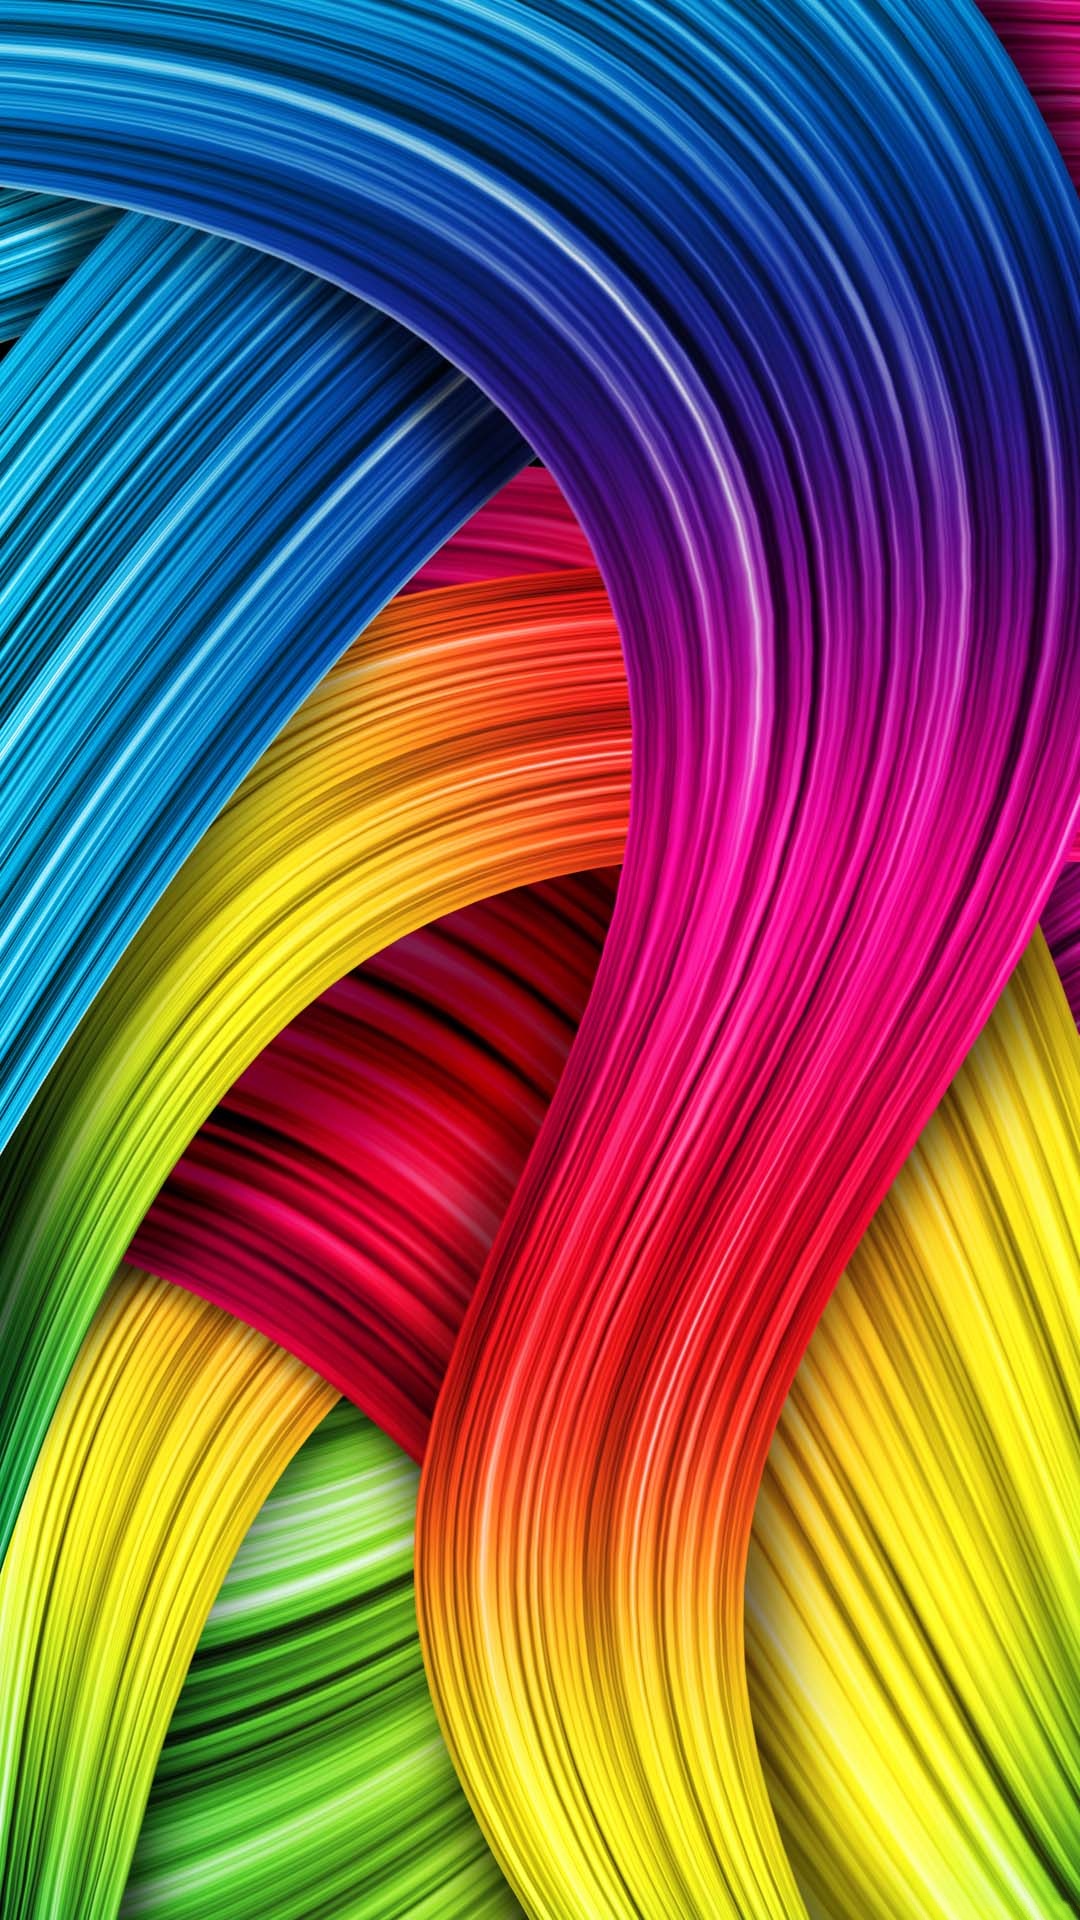 Samsung Galaxy Note Wallpaper That You Can For